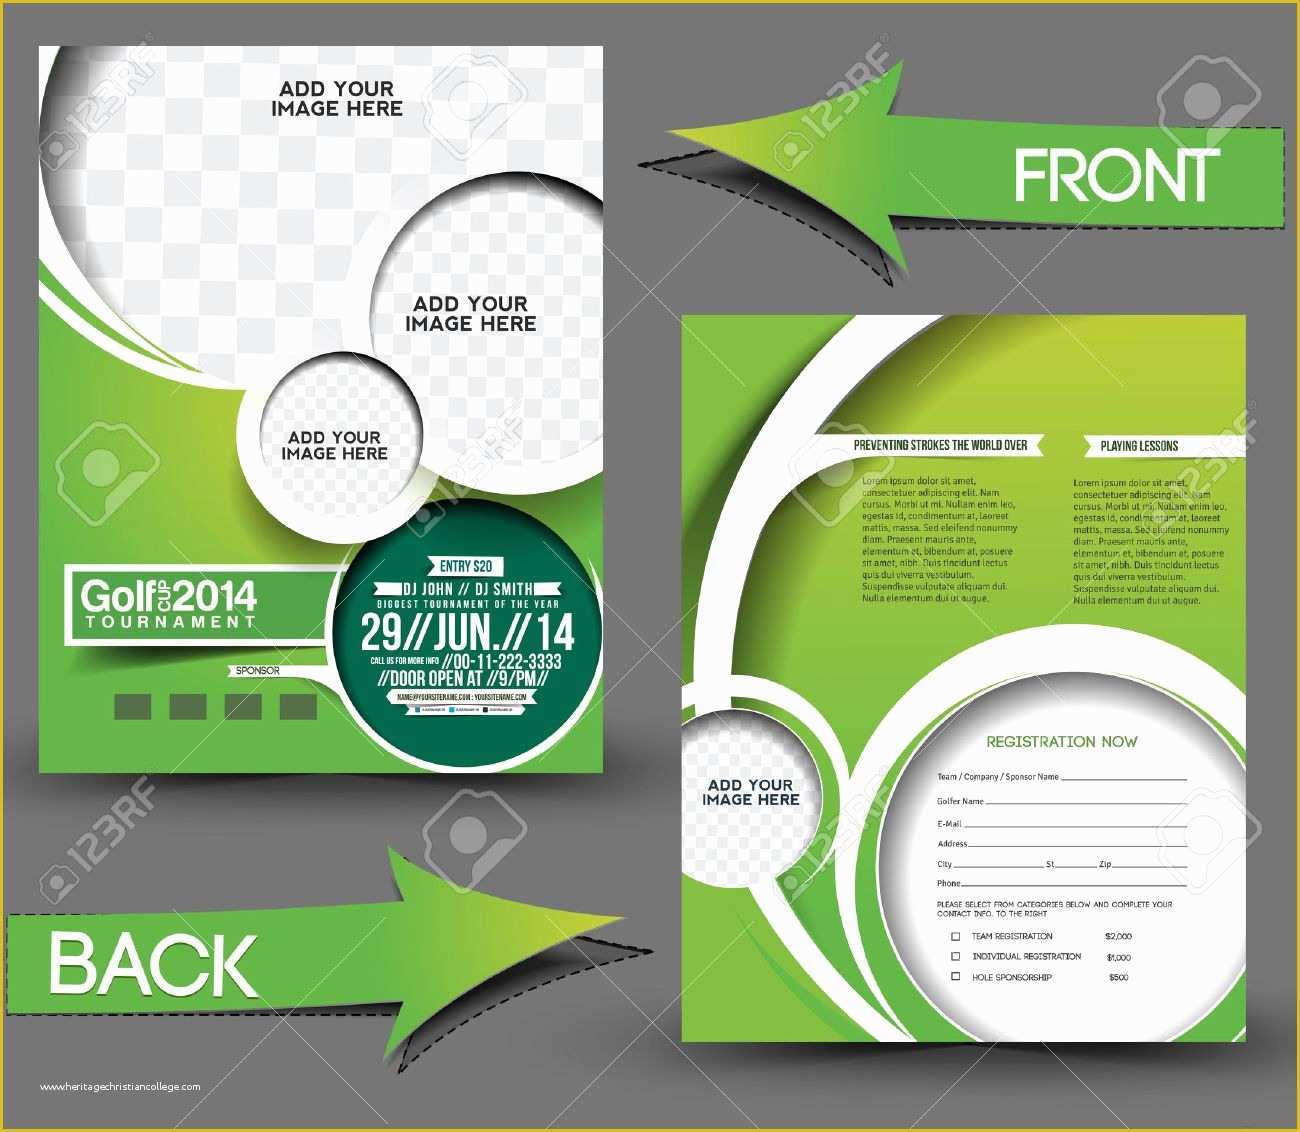 Royalty Free Flyer Templates Of Petition Flyer Templa soccer Flyer Template I